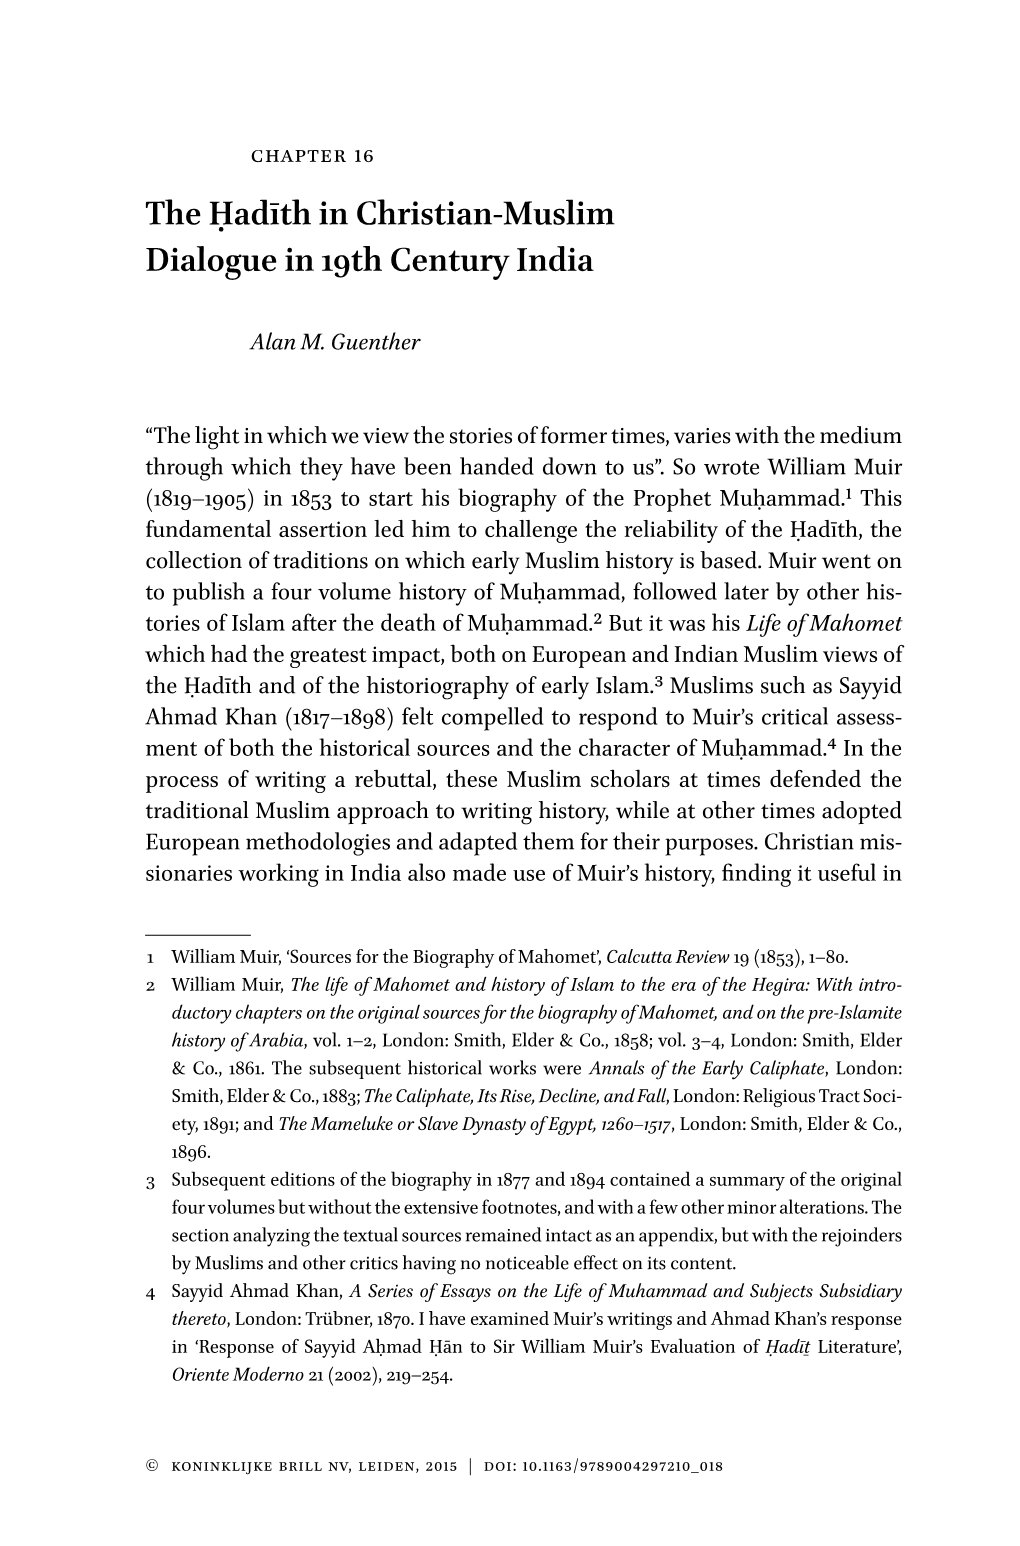 The Ḥadīth in Christian-Muslim Dialogue in 19Th Century India